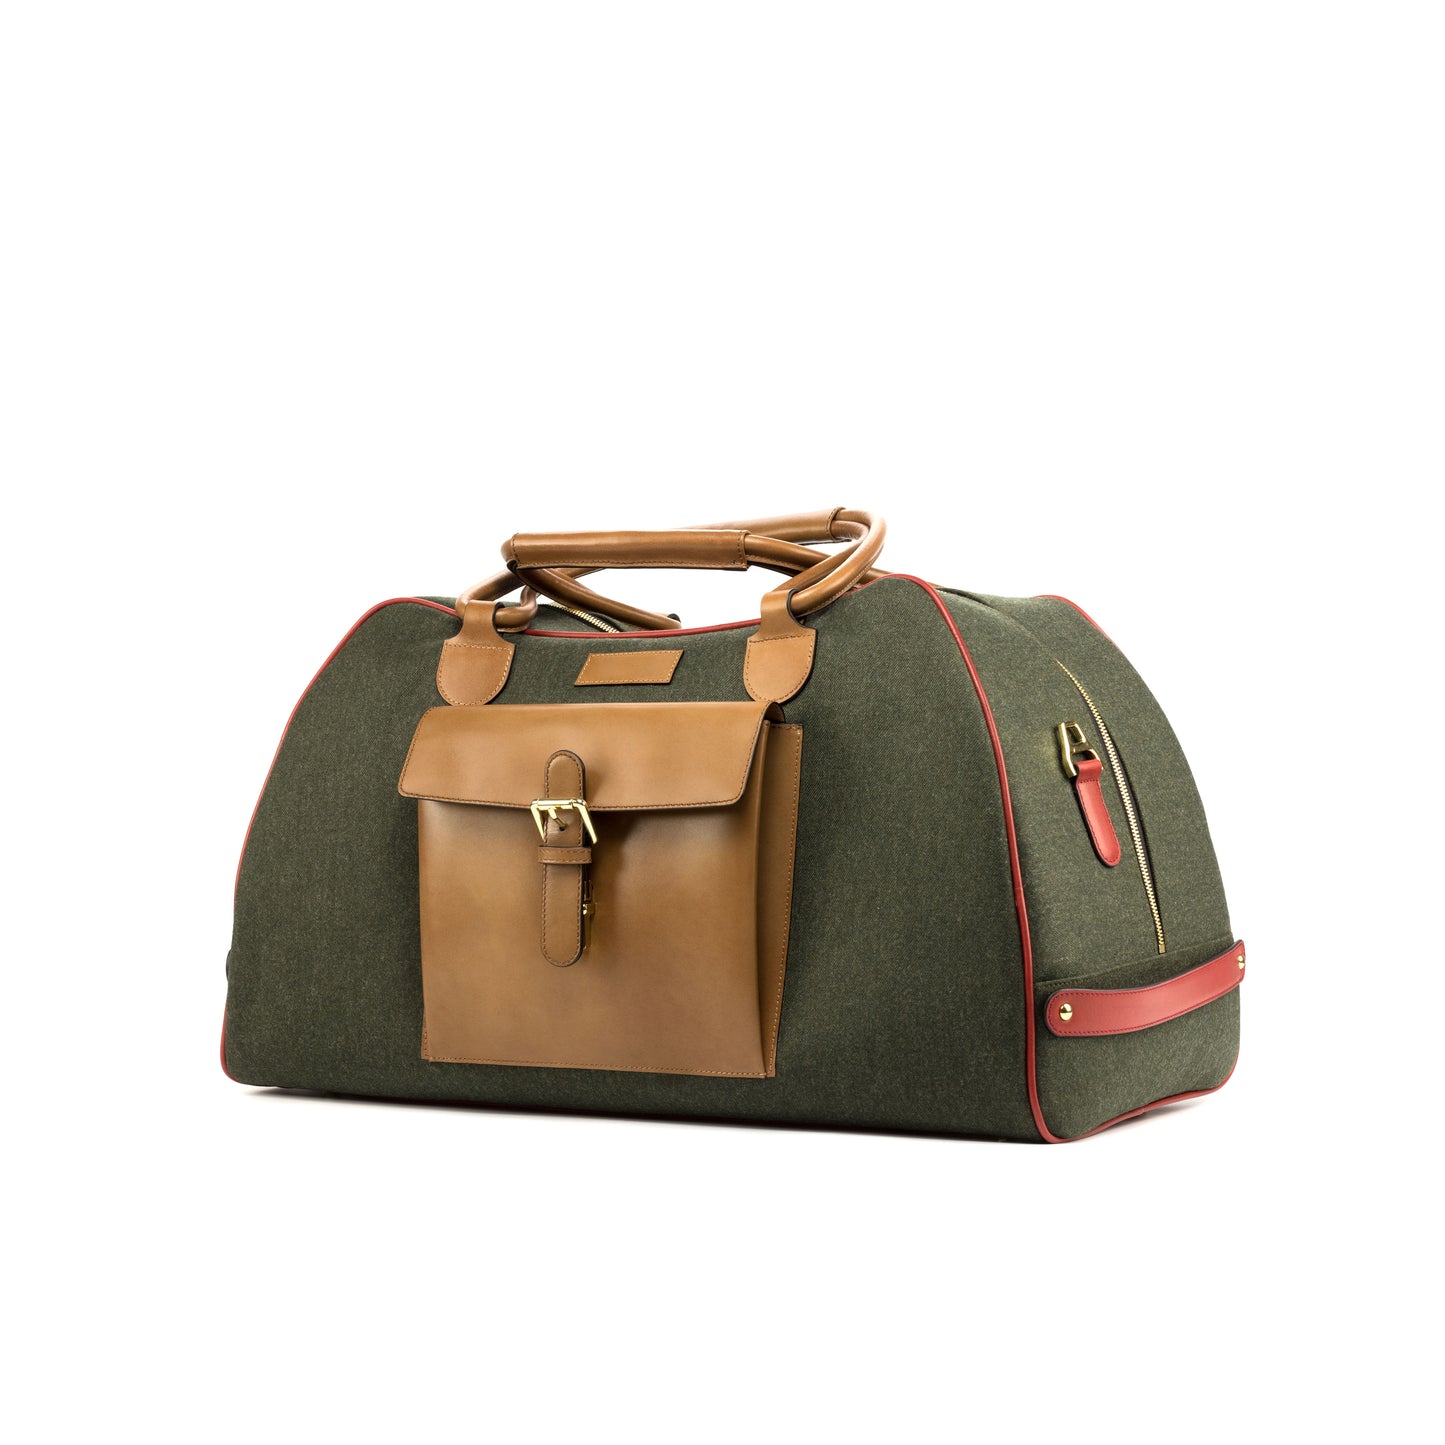 SUITCAFE Travel Duffel Bag Olive Green Flannel and Leather